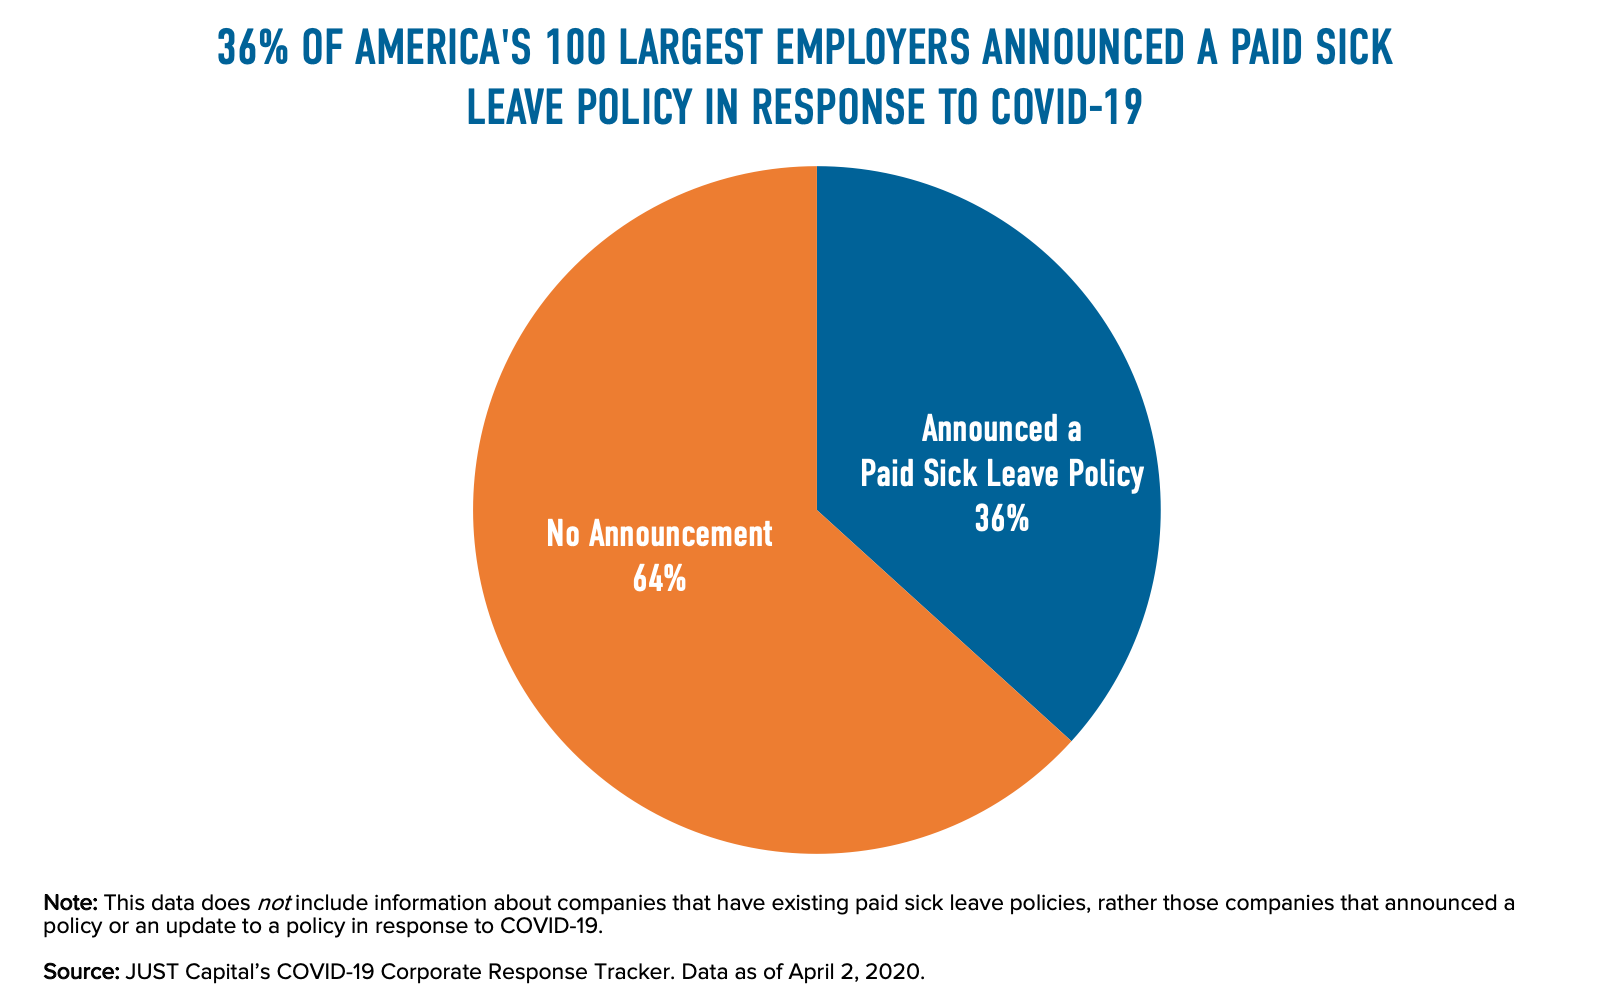 Here’s How Companies Are Approaching Paid Sick Leave During the